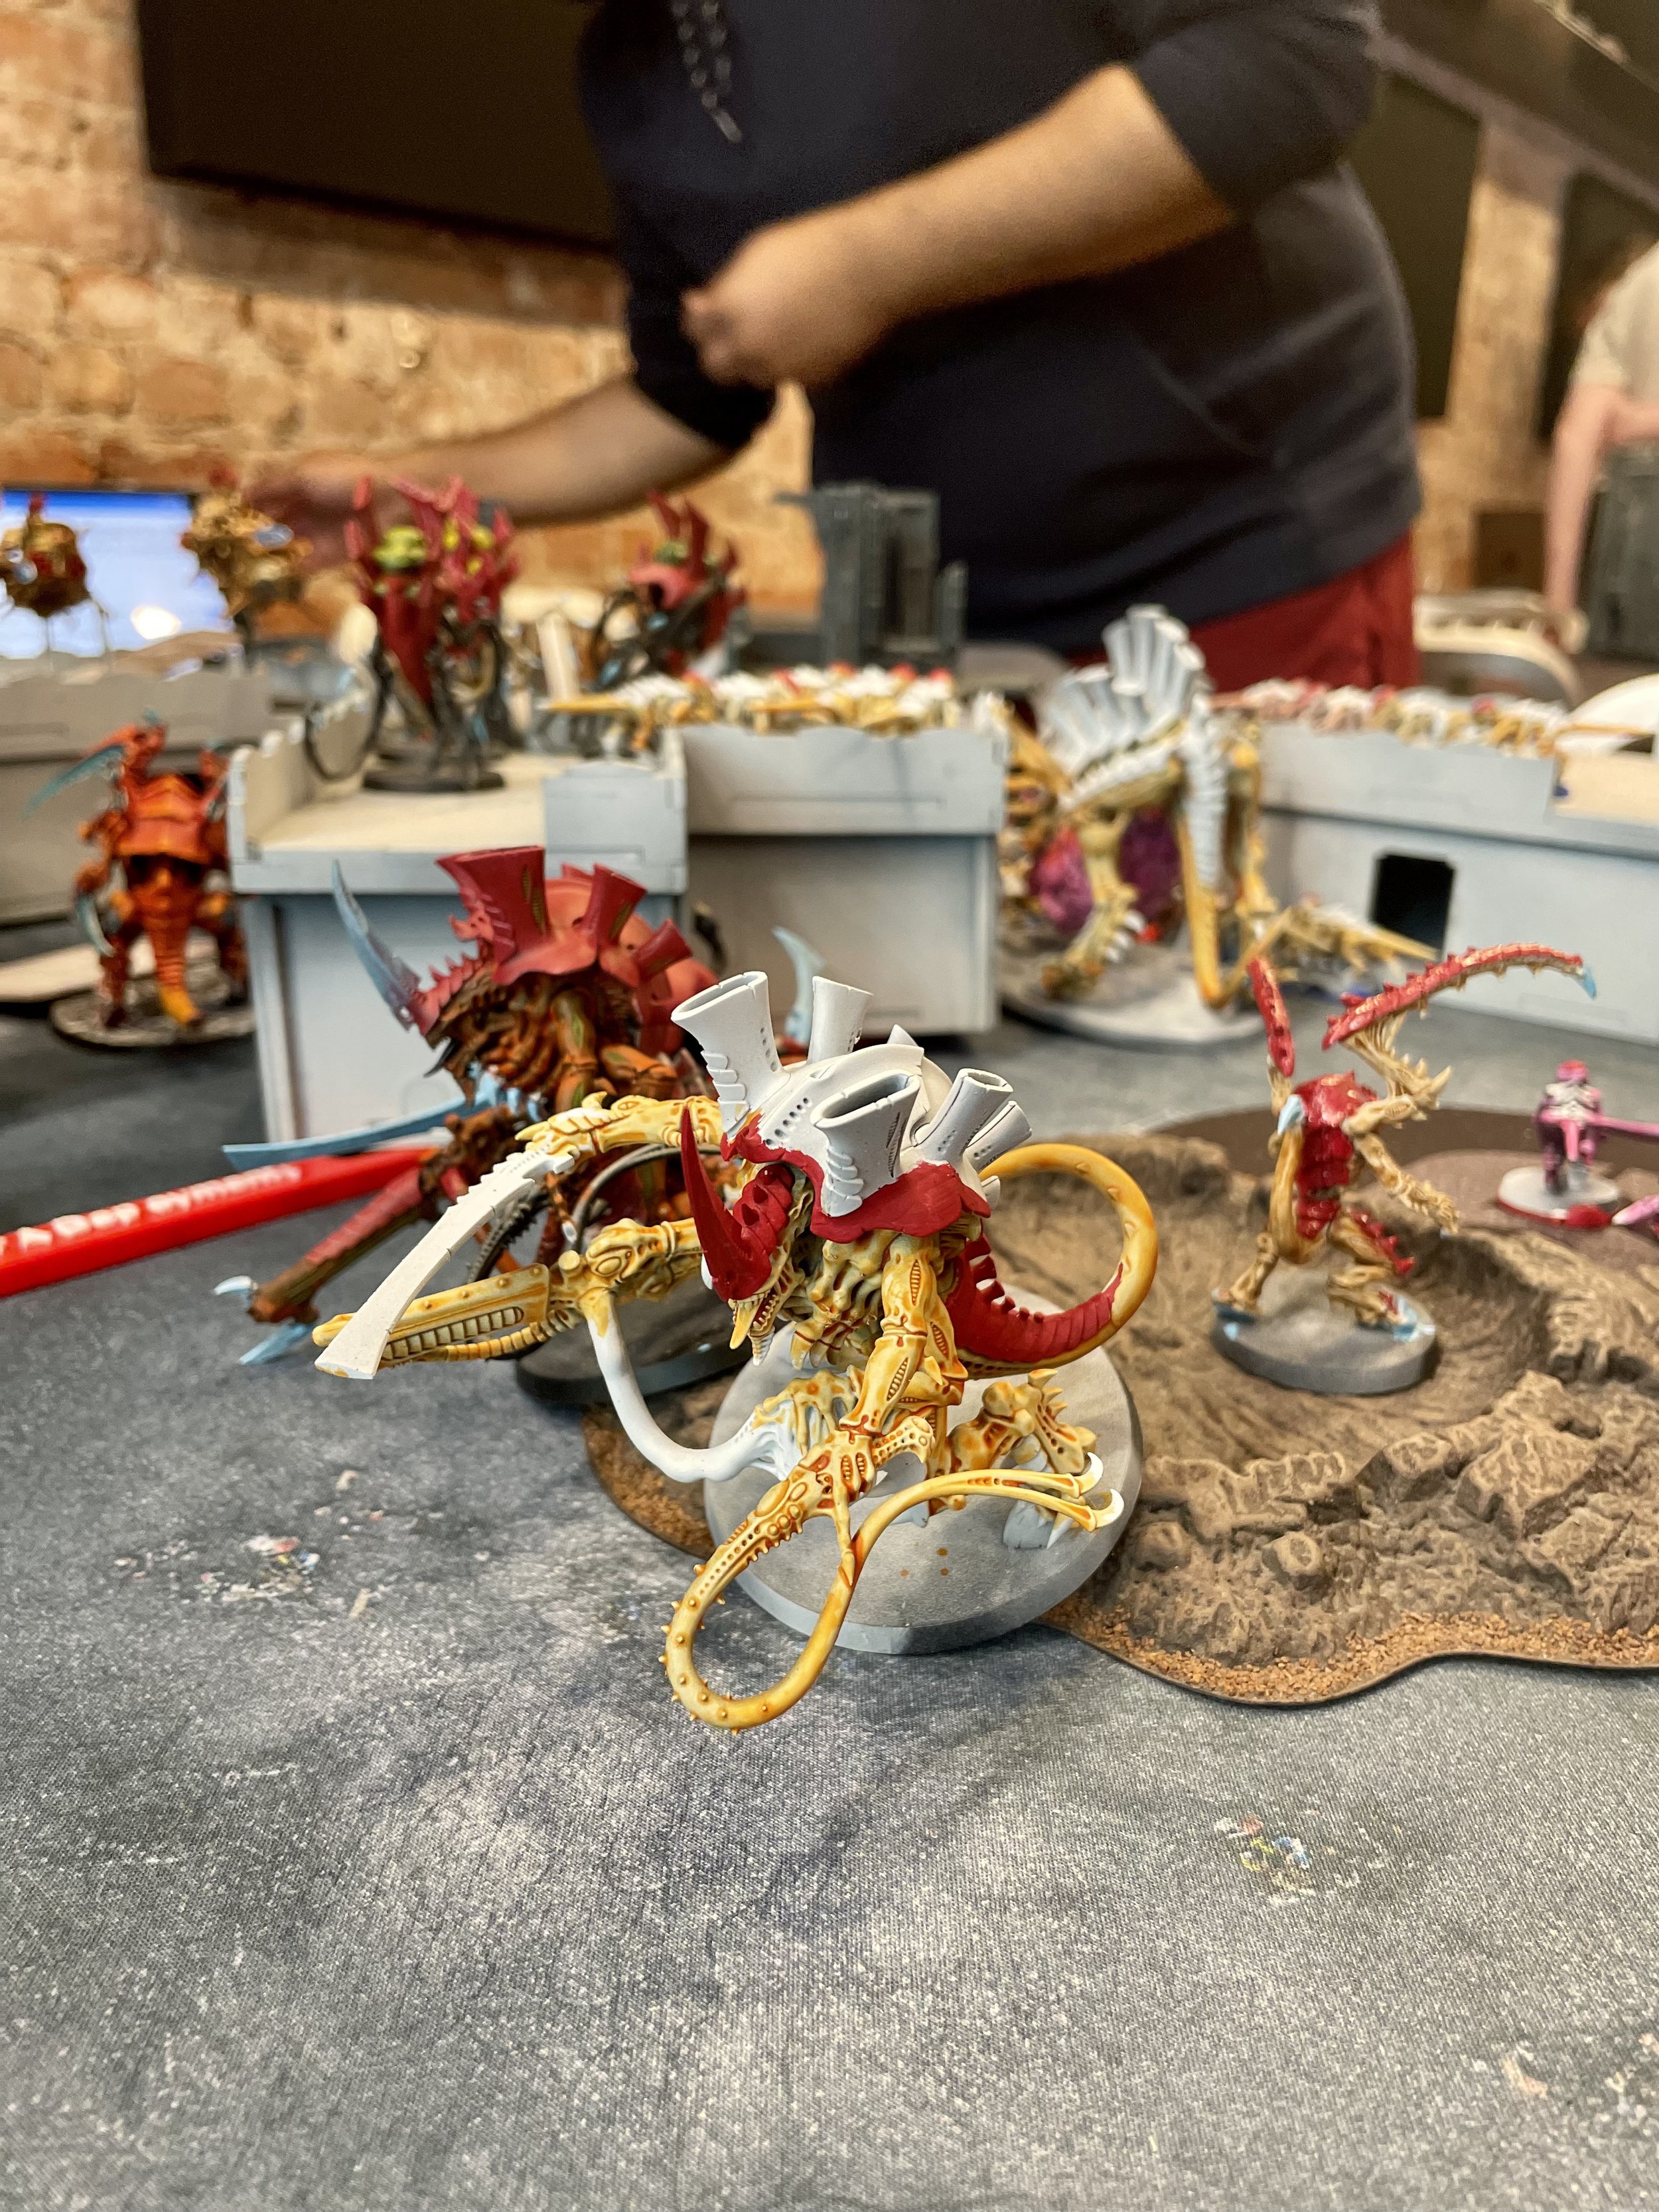 Episode 227: Warhammer - The Heavy Metal of Board Games